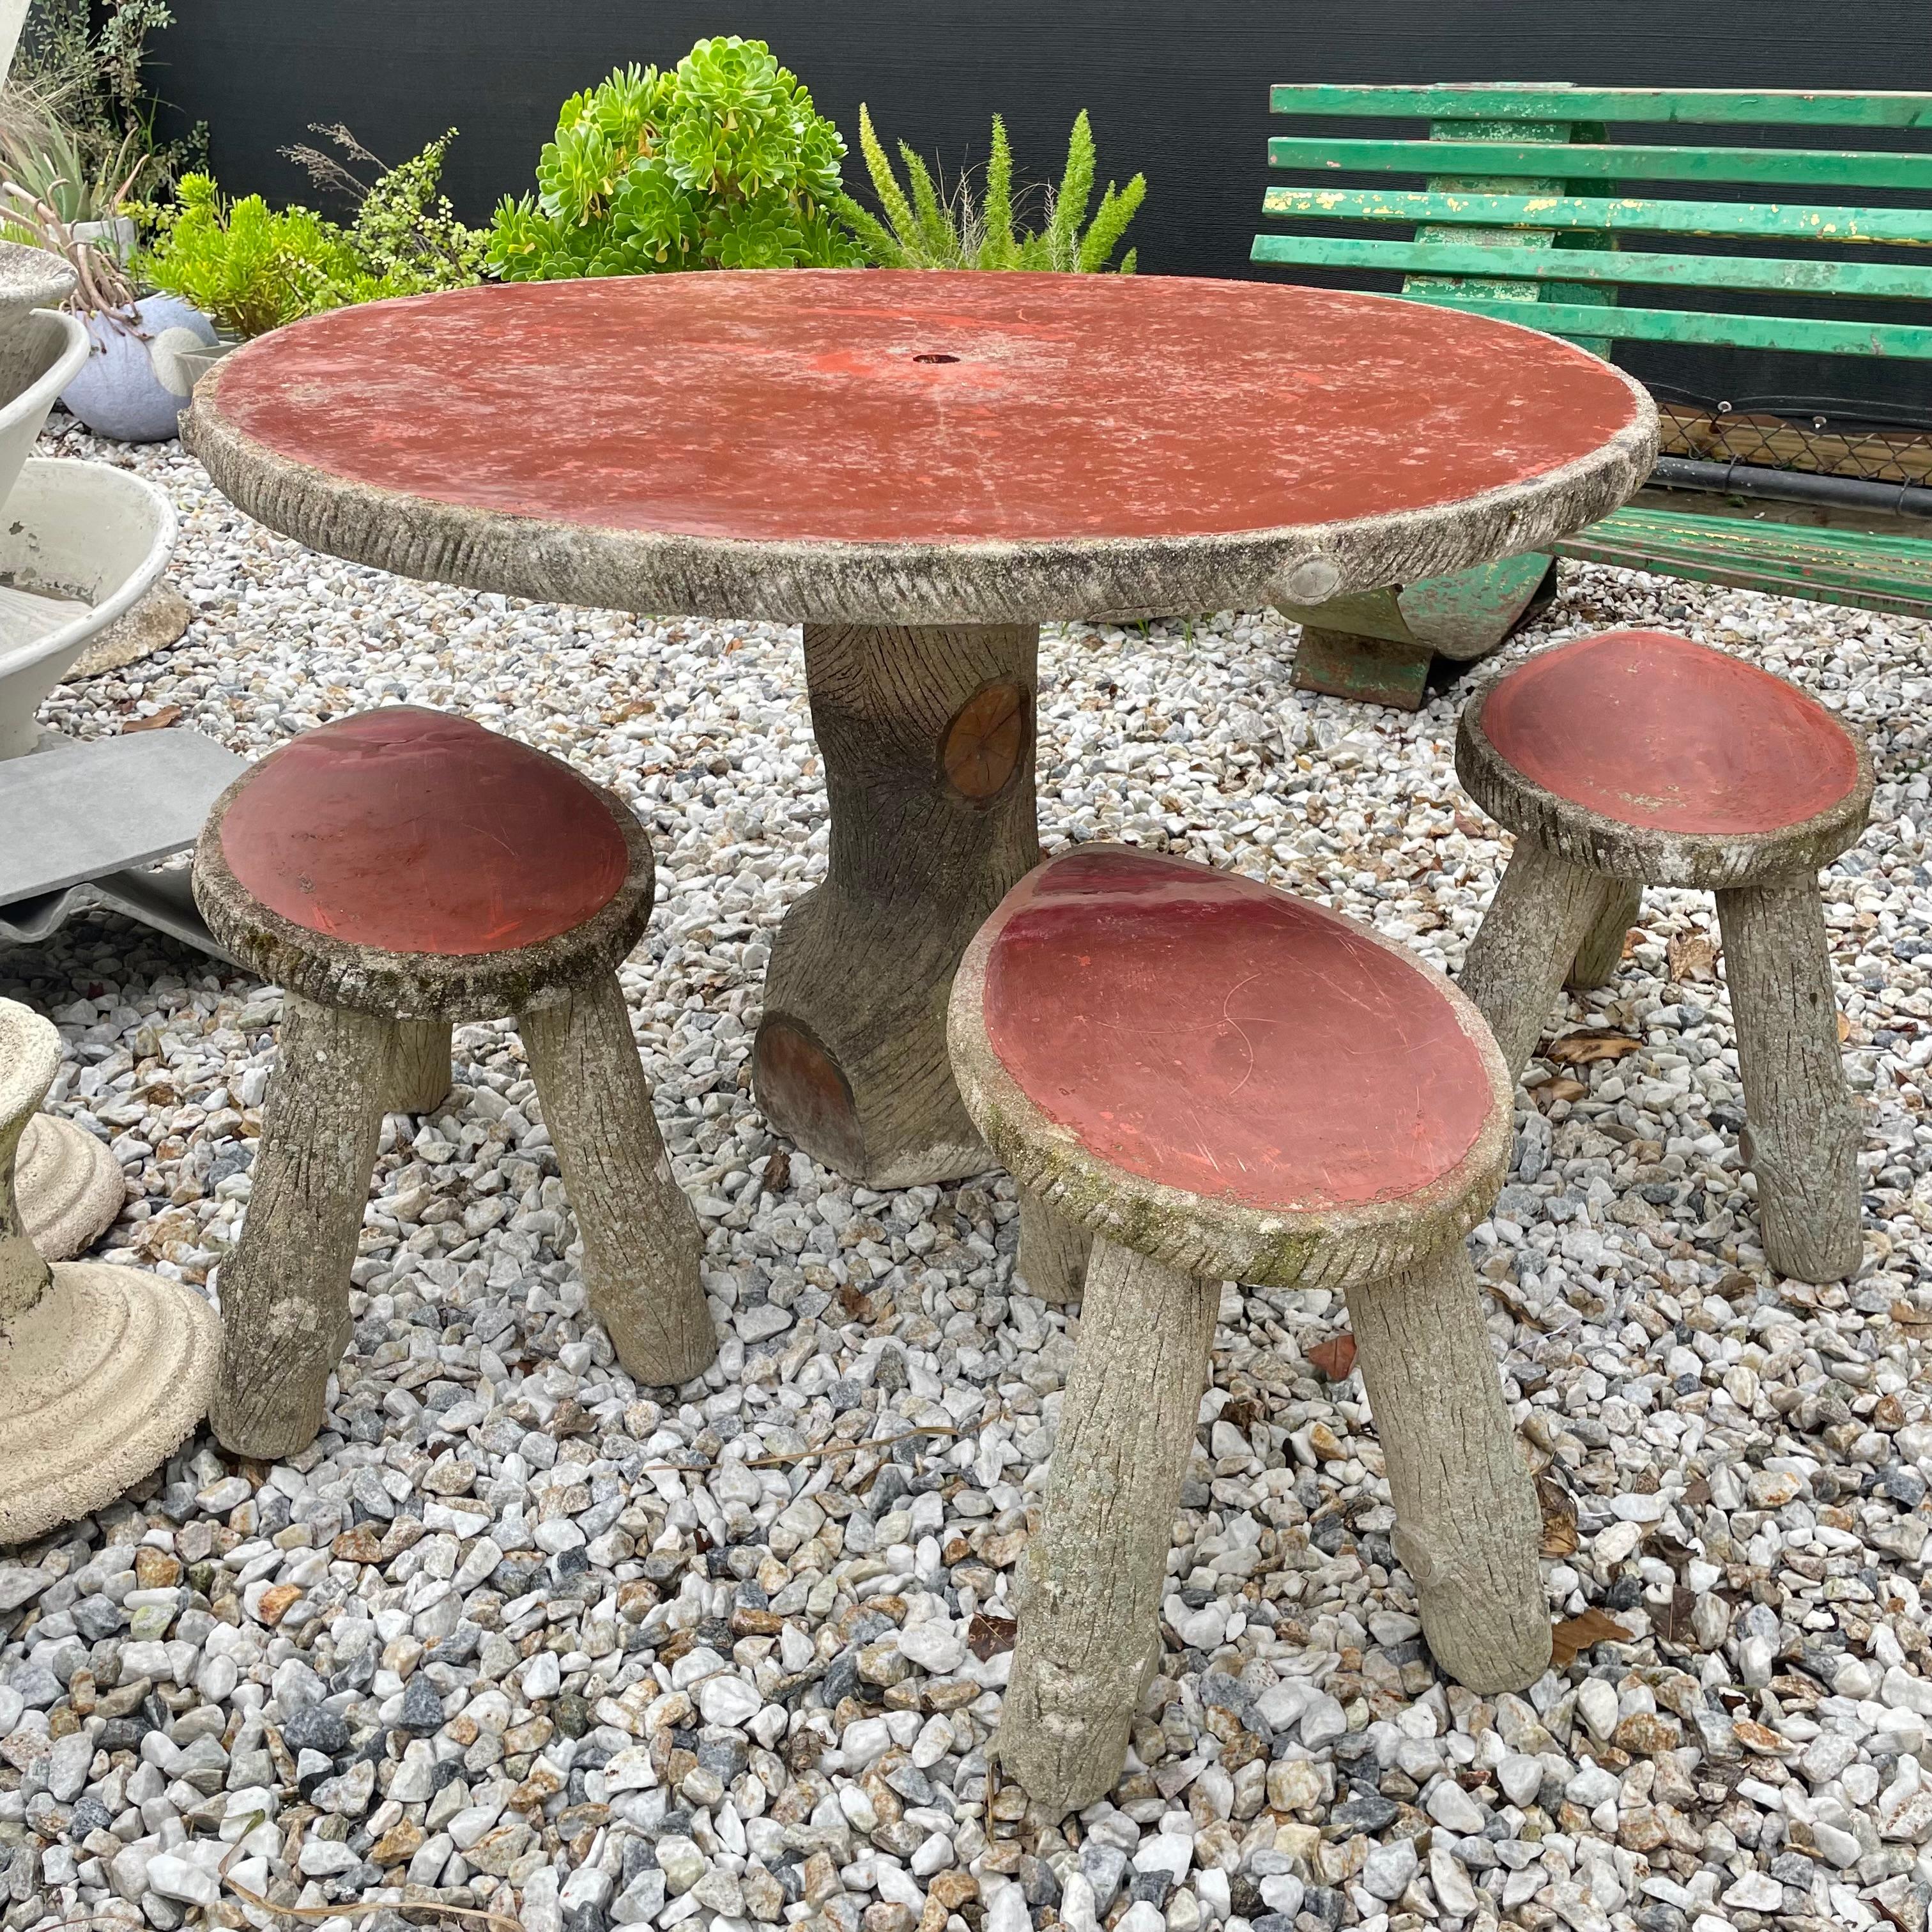 Substantial faux-bois concrete table and stools from France, made in the 1970s. Painted tops to stools and table. 5 stools and one table included in this set. Legs and table base resemble tree trunks and branches. Each piece is made of solid